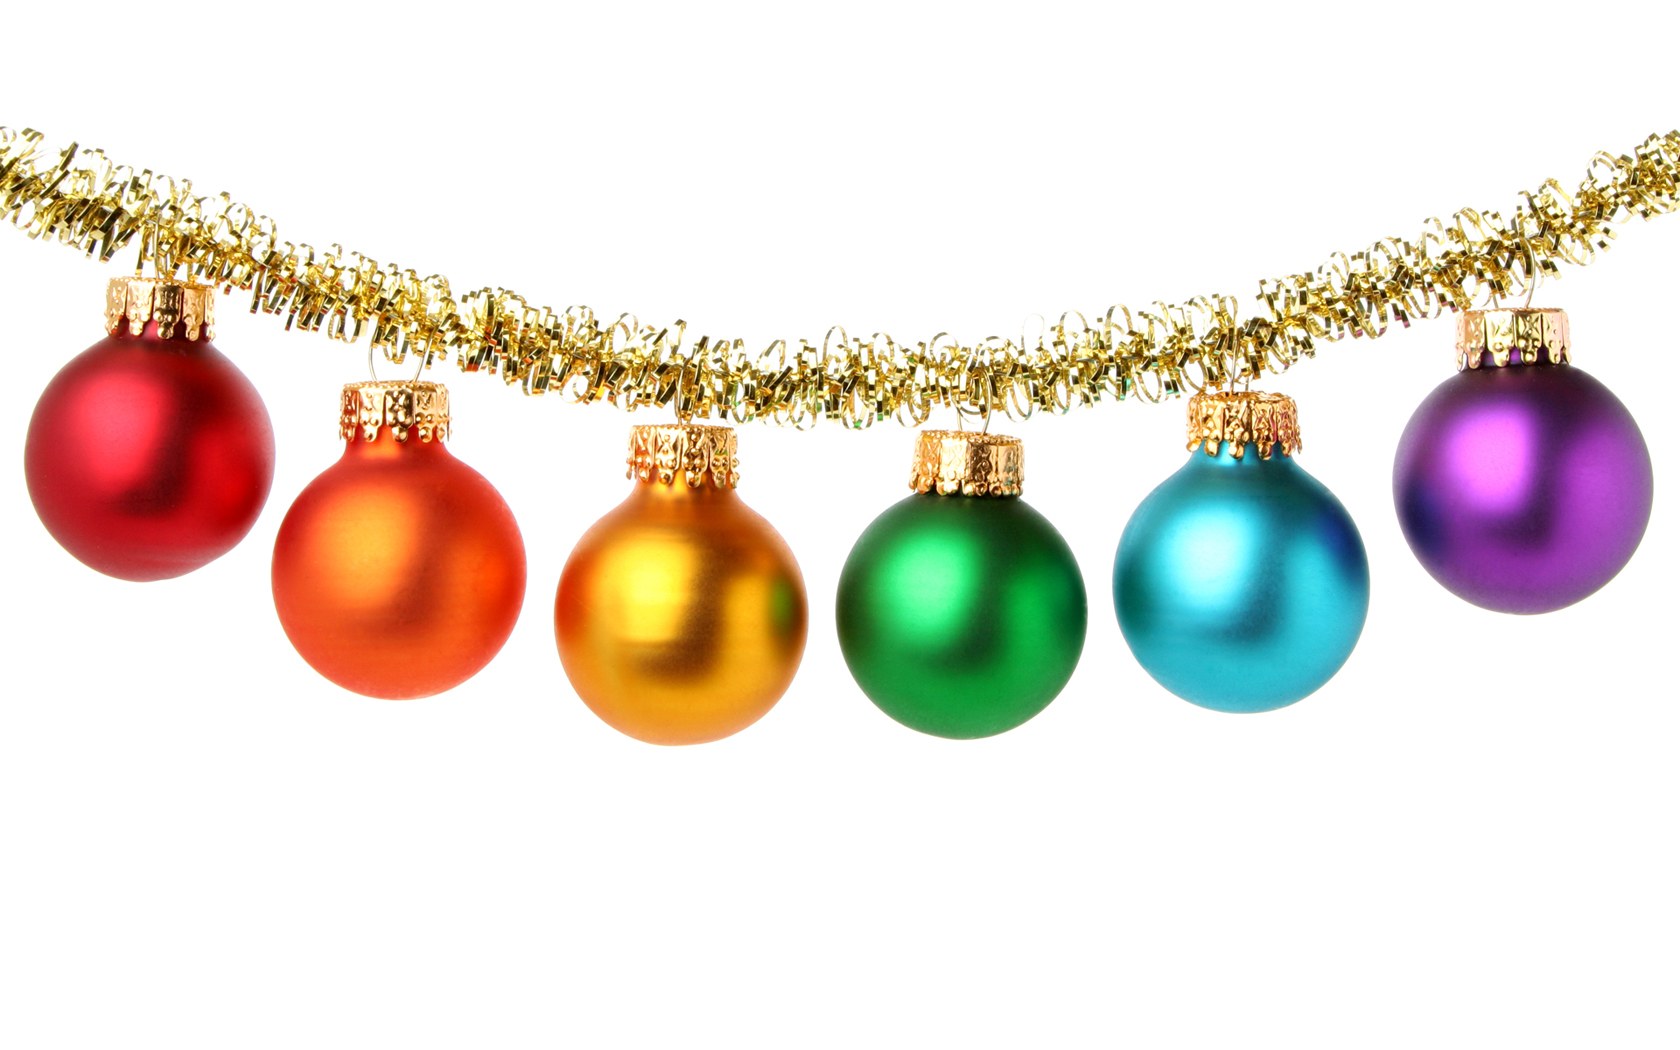 Colorful Christmas Ornament Backgrounds – Happy Holidays!